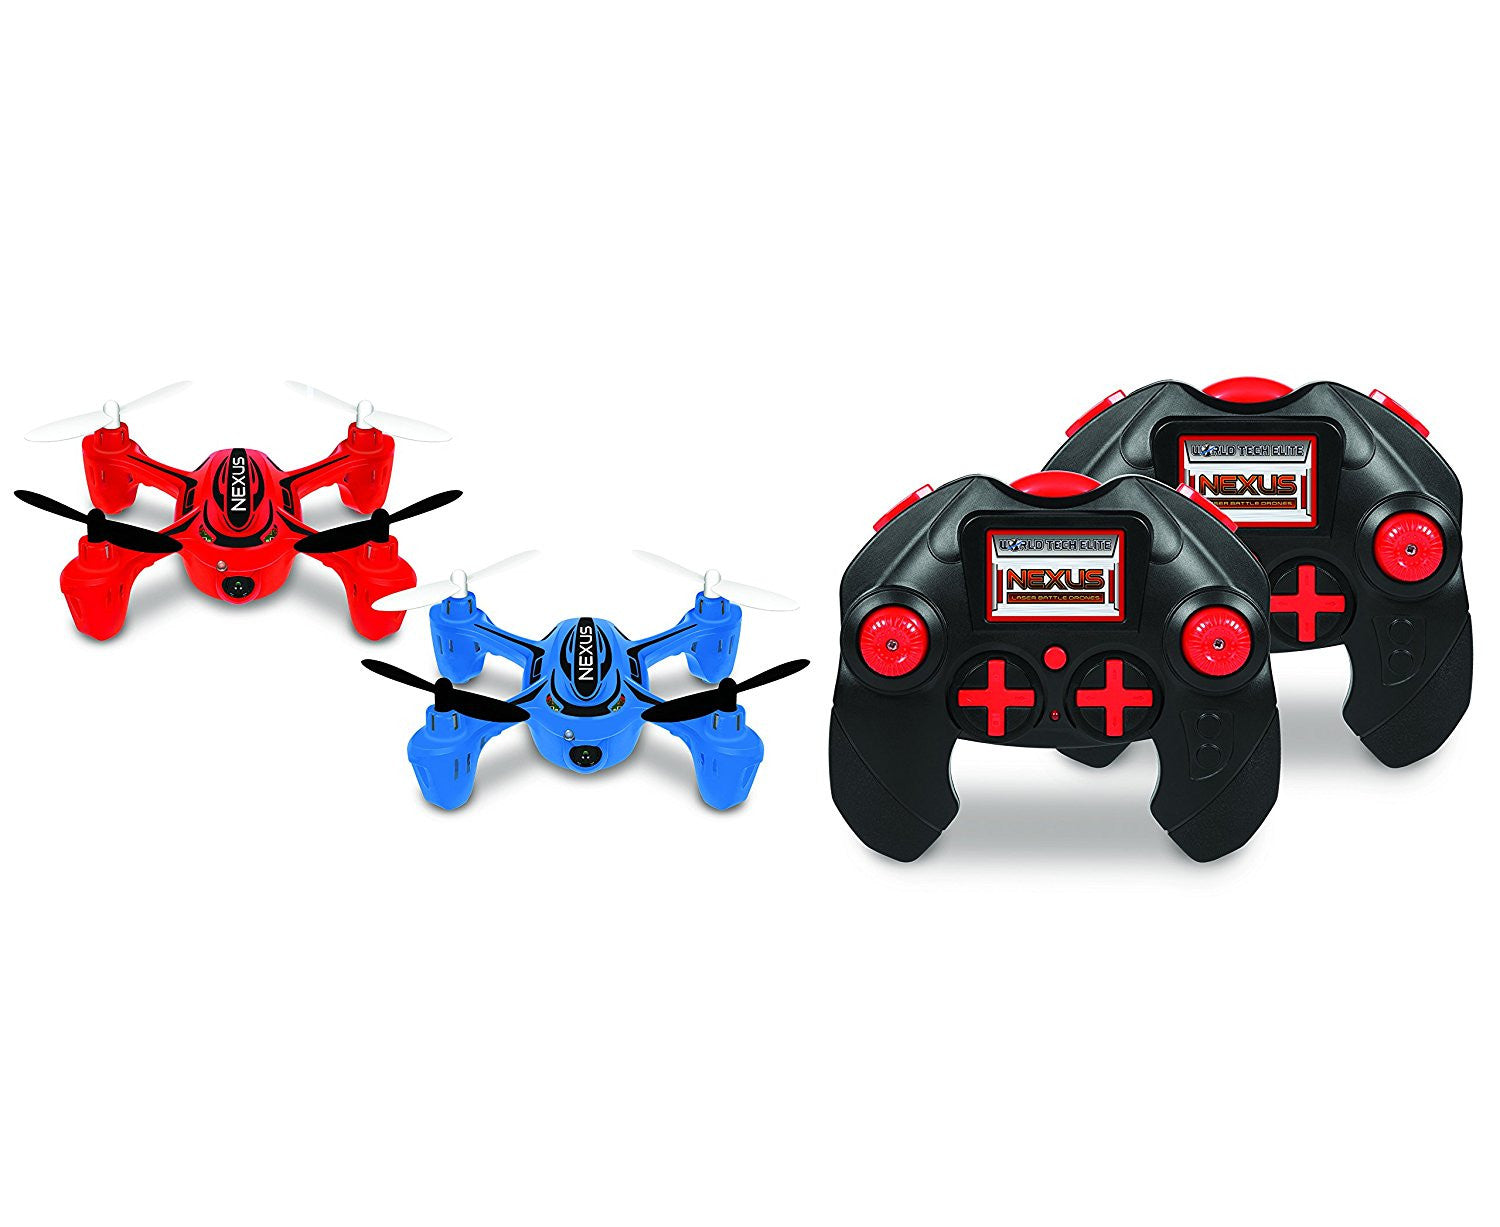 Nexus 2.4ghz 4.5ch Camera Rc Laser Battle Drone (colors Vary)